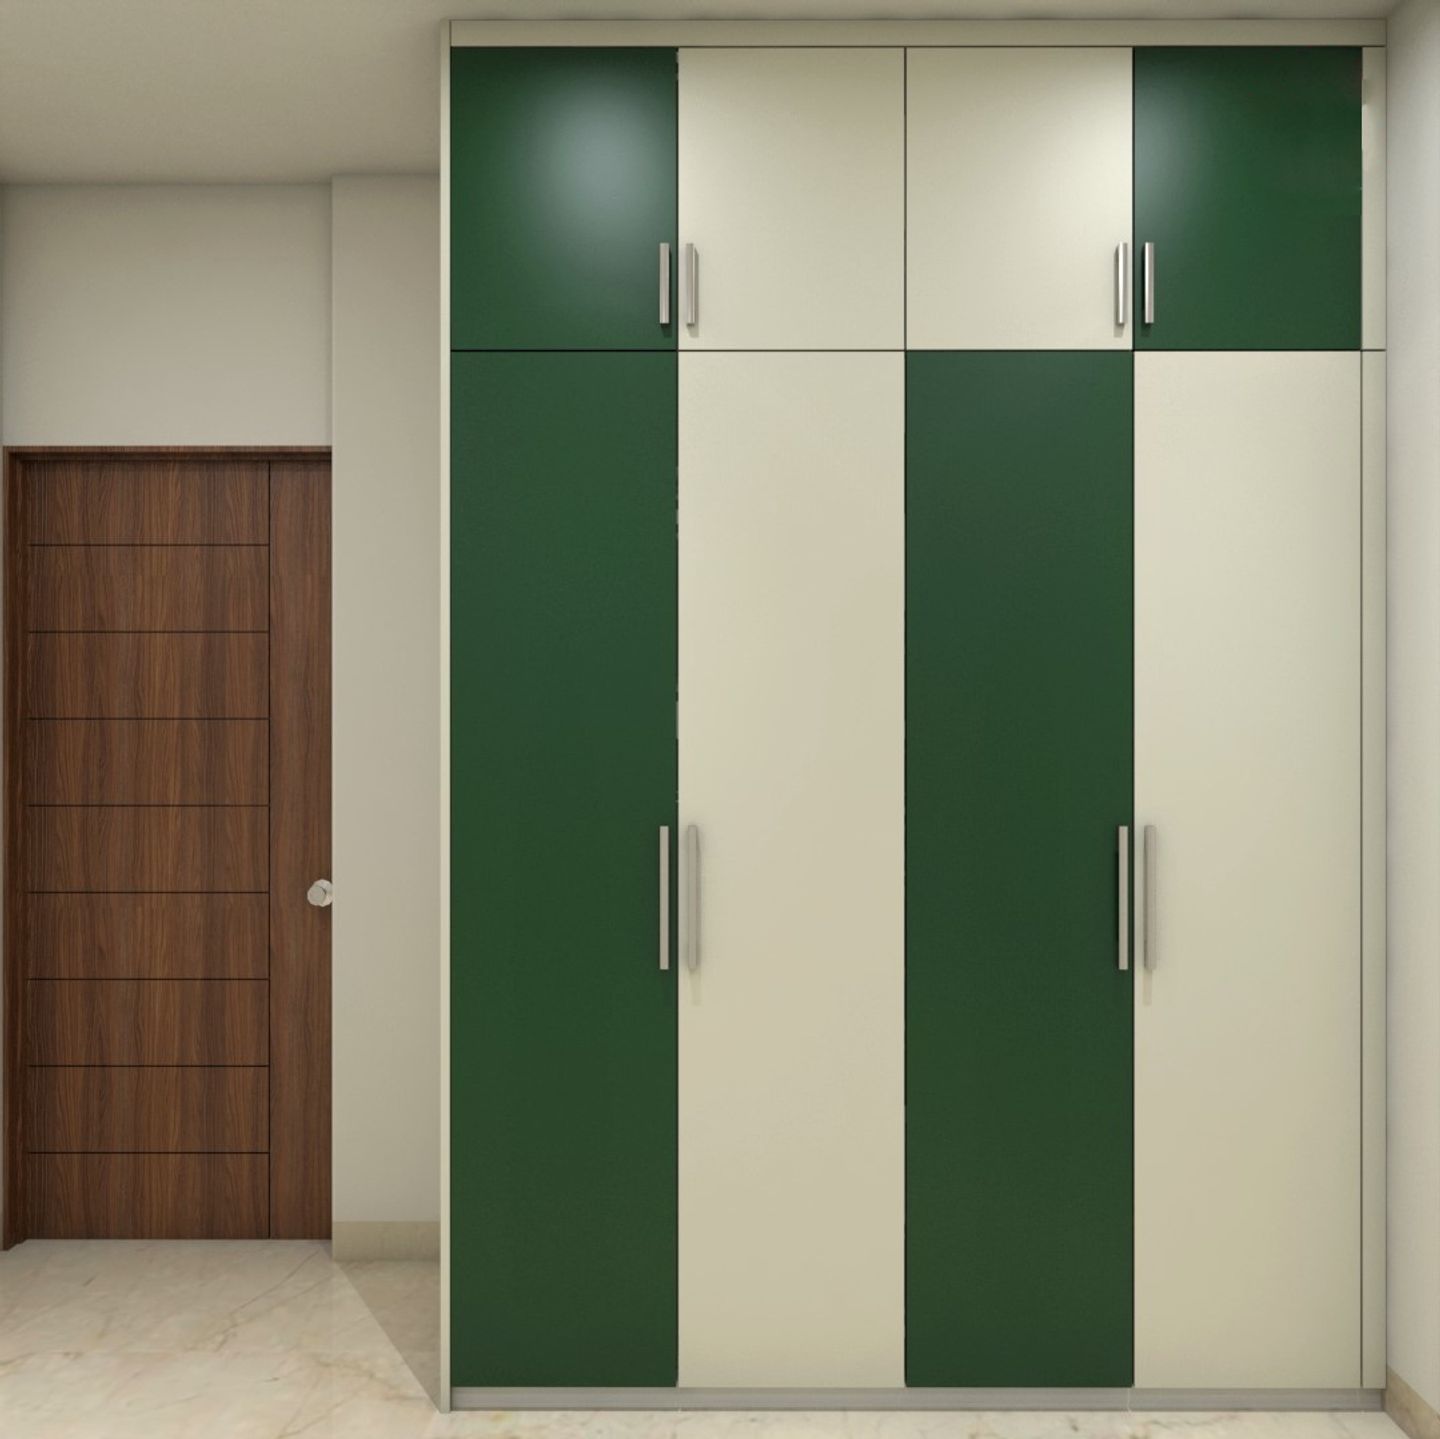 Modular Wardrobe With Compact Design For Rental Homes - Livspace